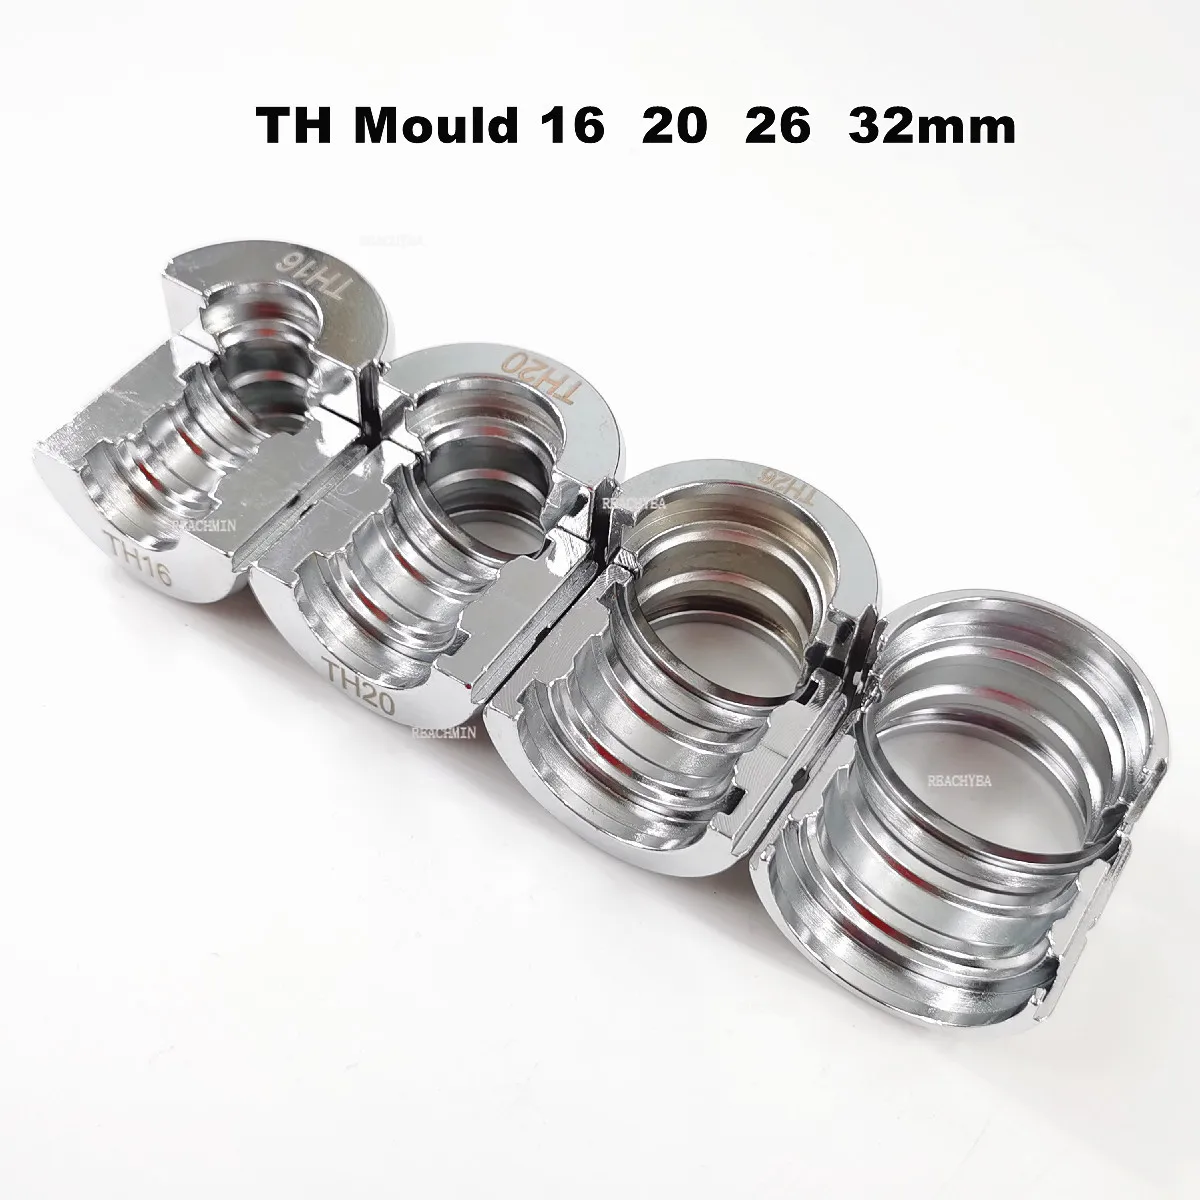 

1 Pair TH mould 16, 20, 25,26, 32mm Pipe Crimping Tool Jaws 1632 hydraulic pressure pipe clamp mould